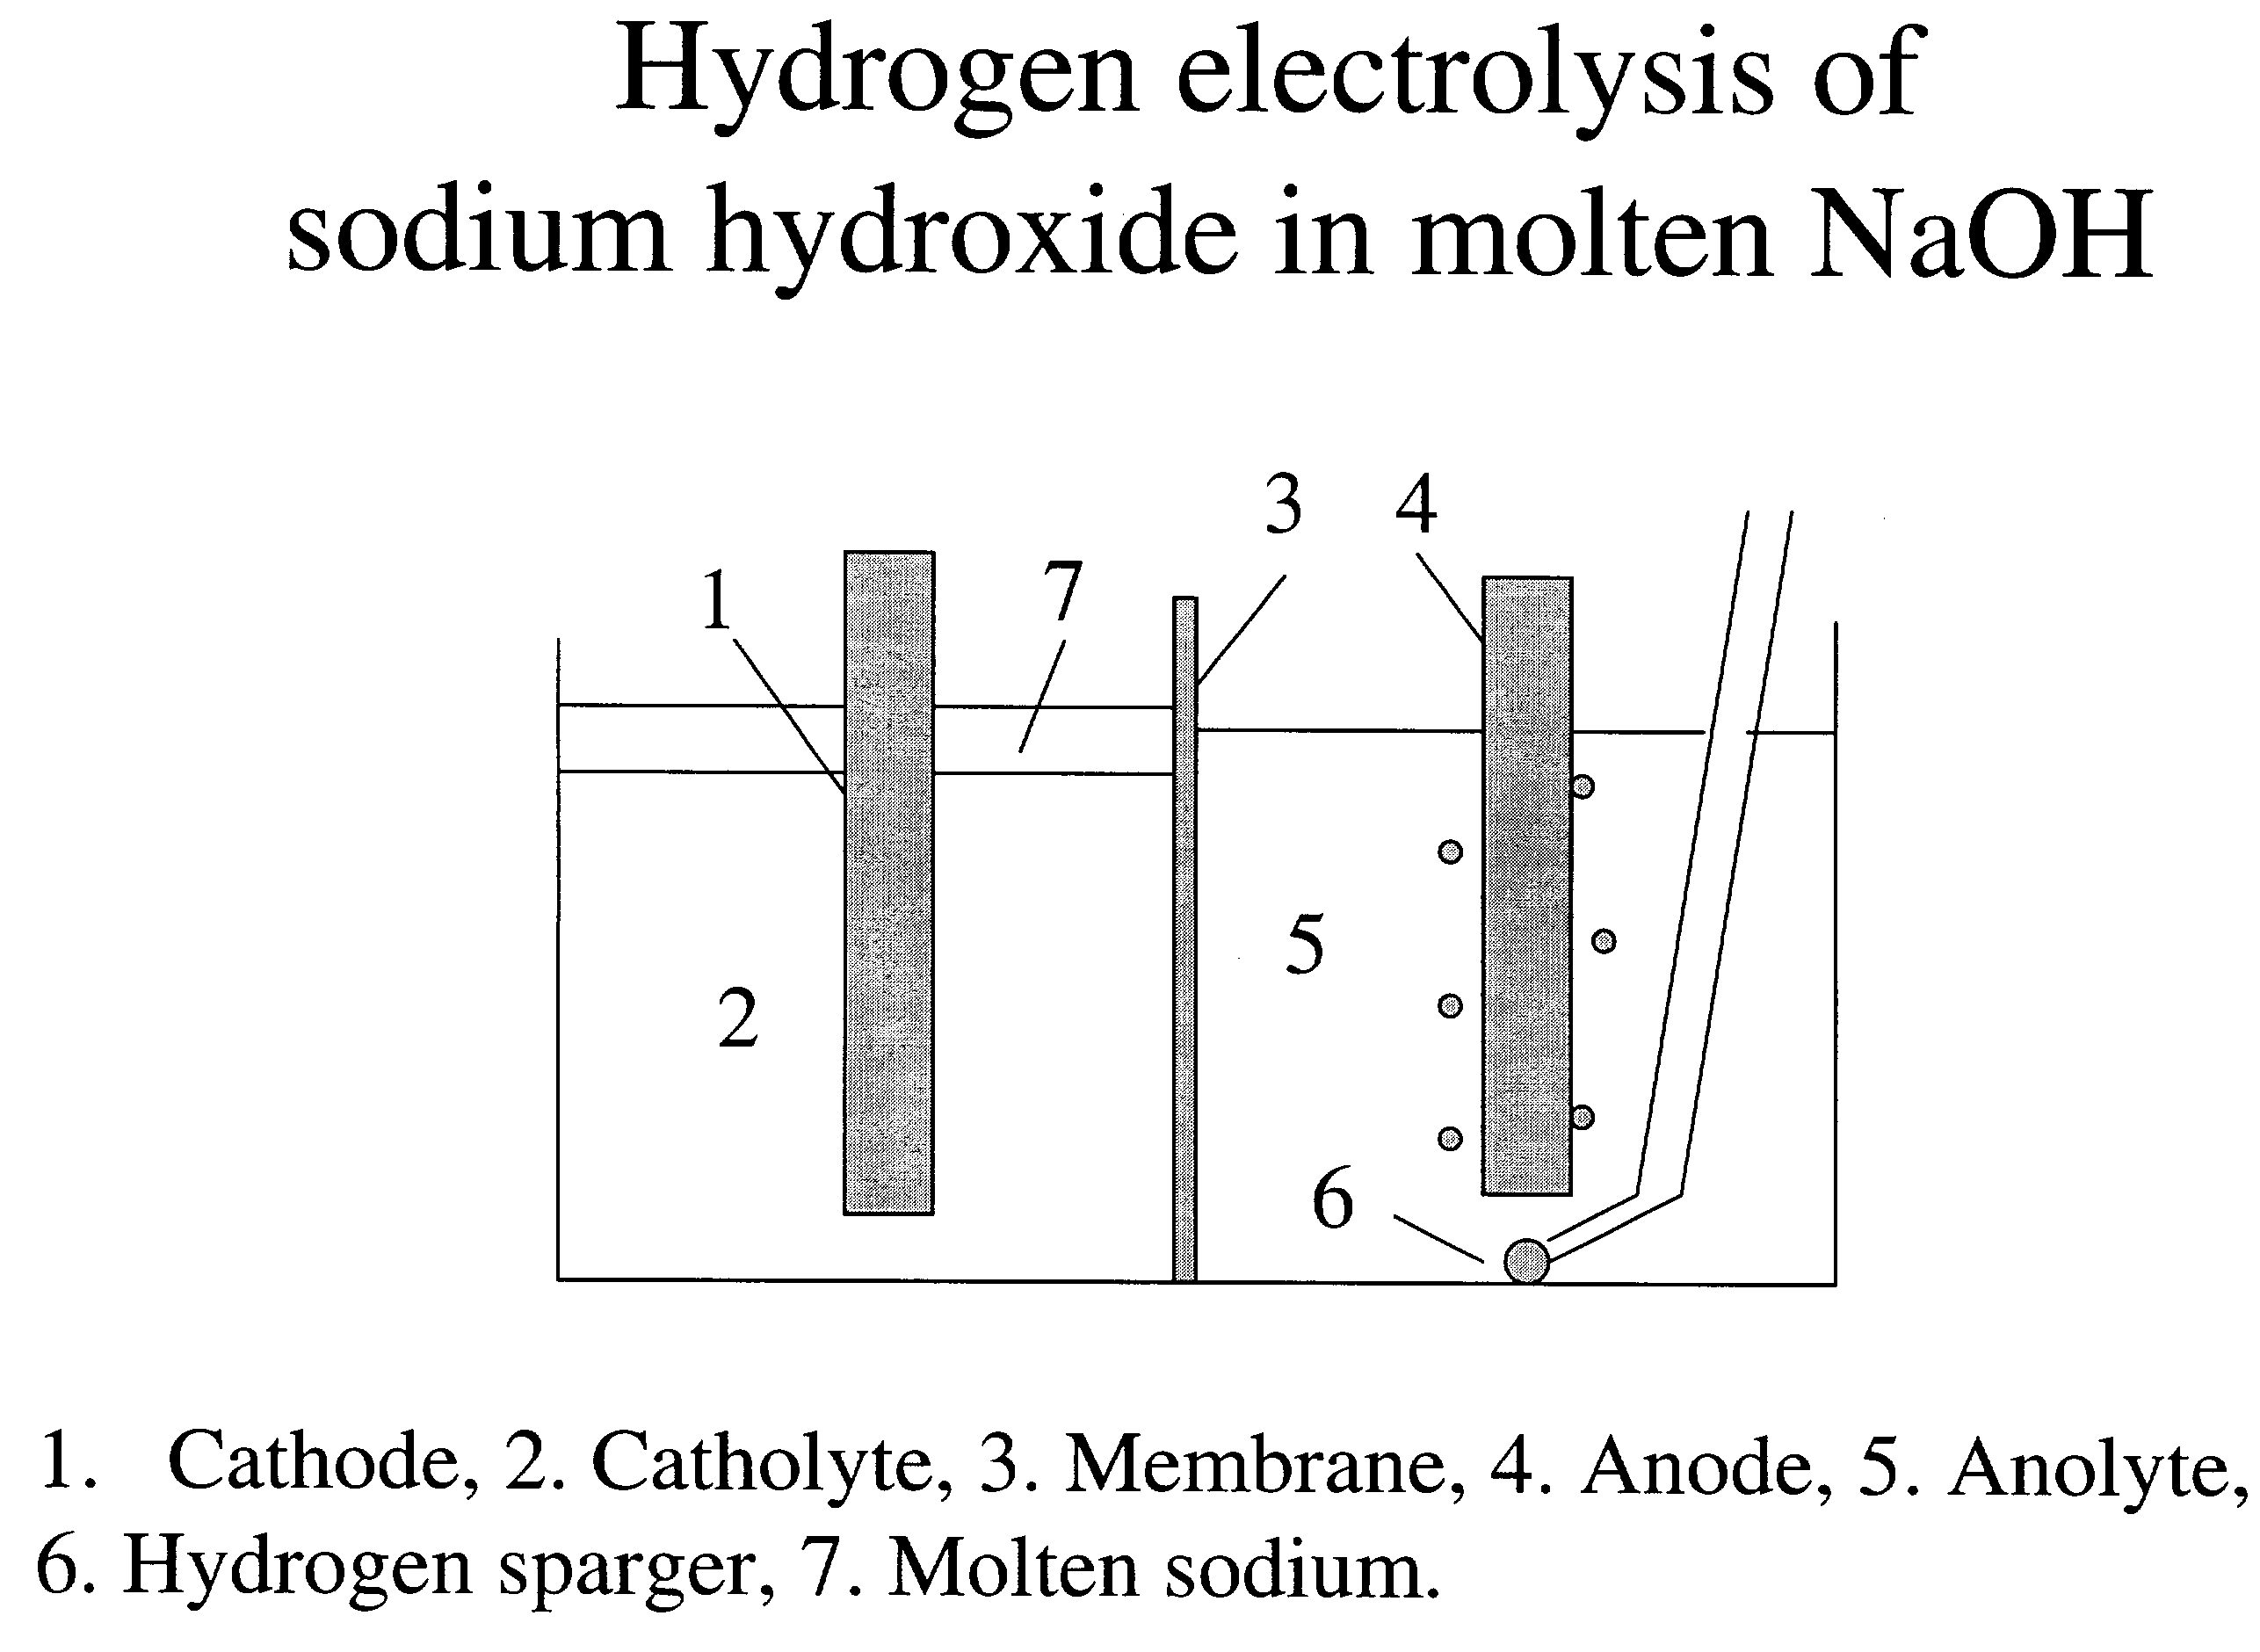 Hydrogen-assisted electrolysis processes